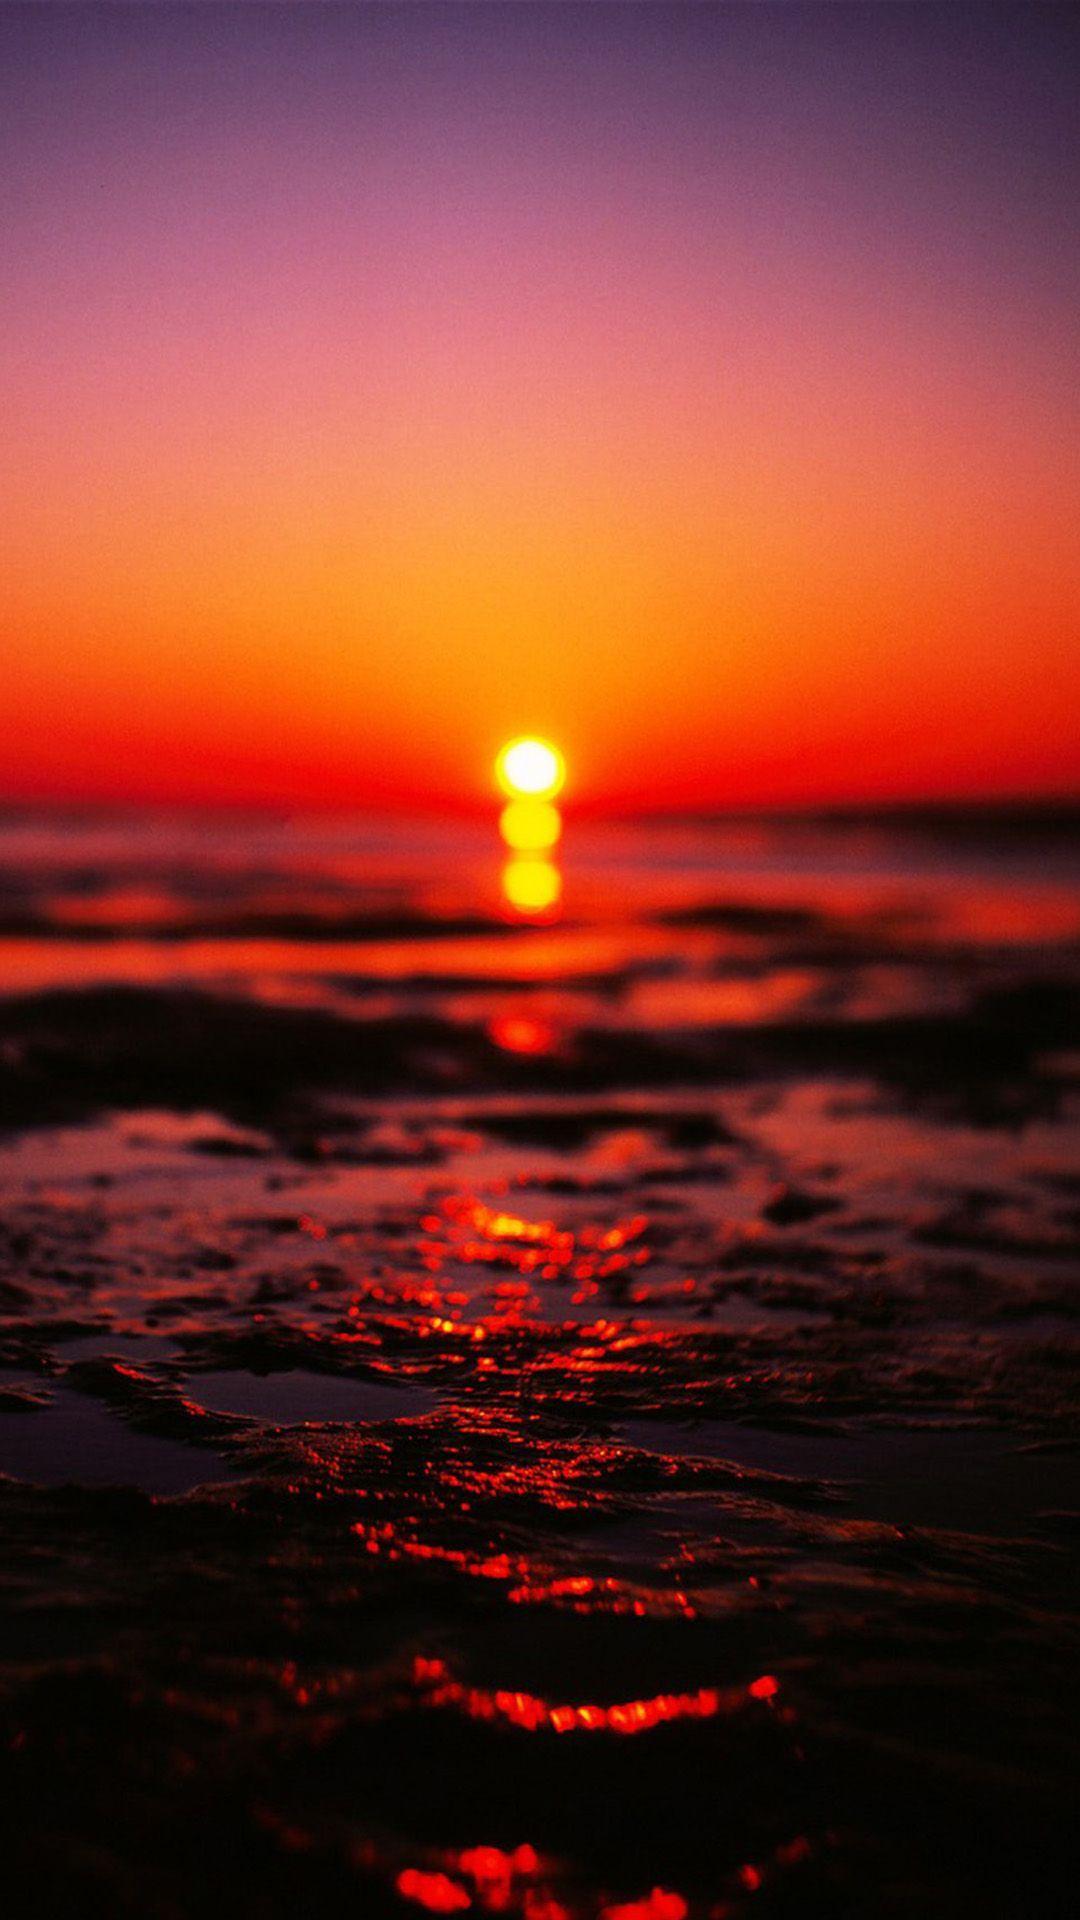 Sunset Hd Aesthetic Wallpapers - Top Free Sunset Hd Aesthetic